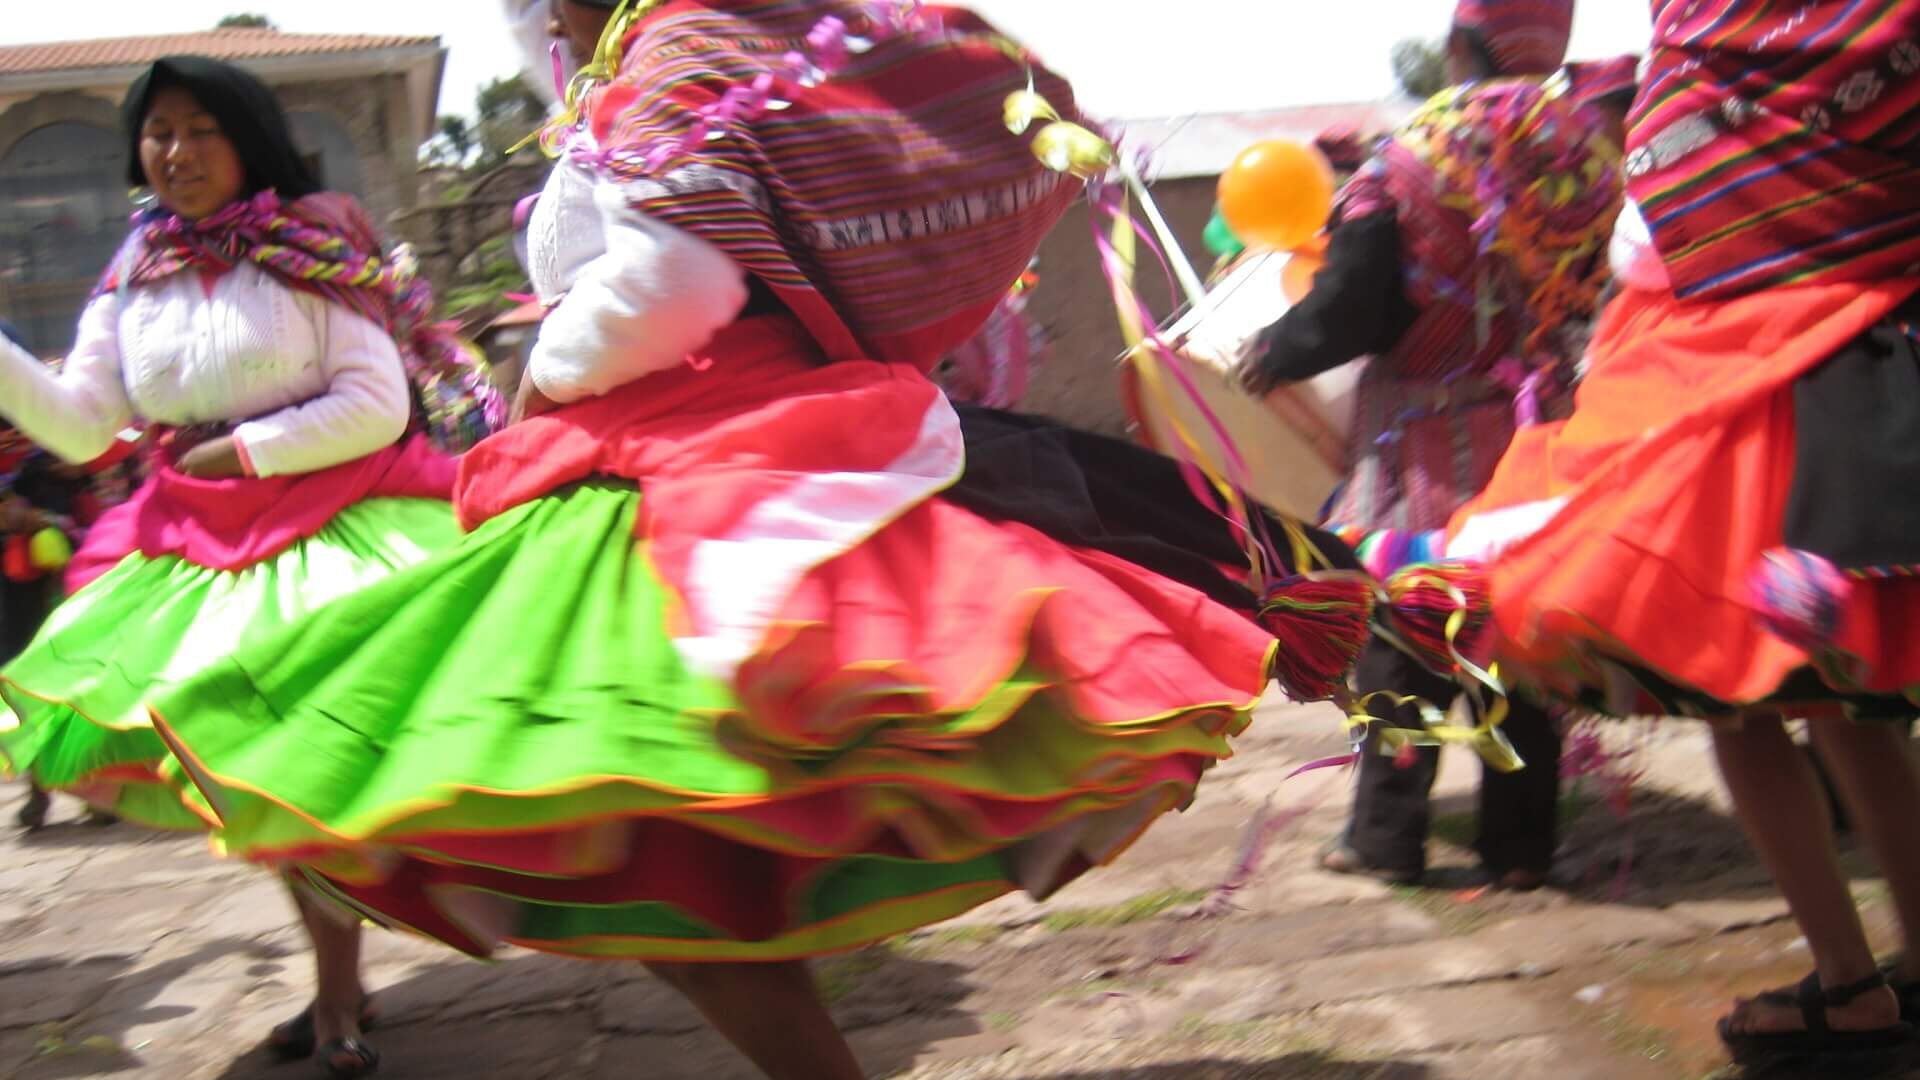 Colorful traditional dresses worn by dancing women at a traditional fiesta on Taquile island, Lake Titicaca, Peru. | RESPONSible Travel Peru